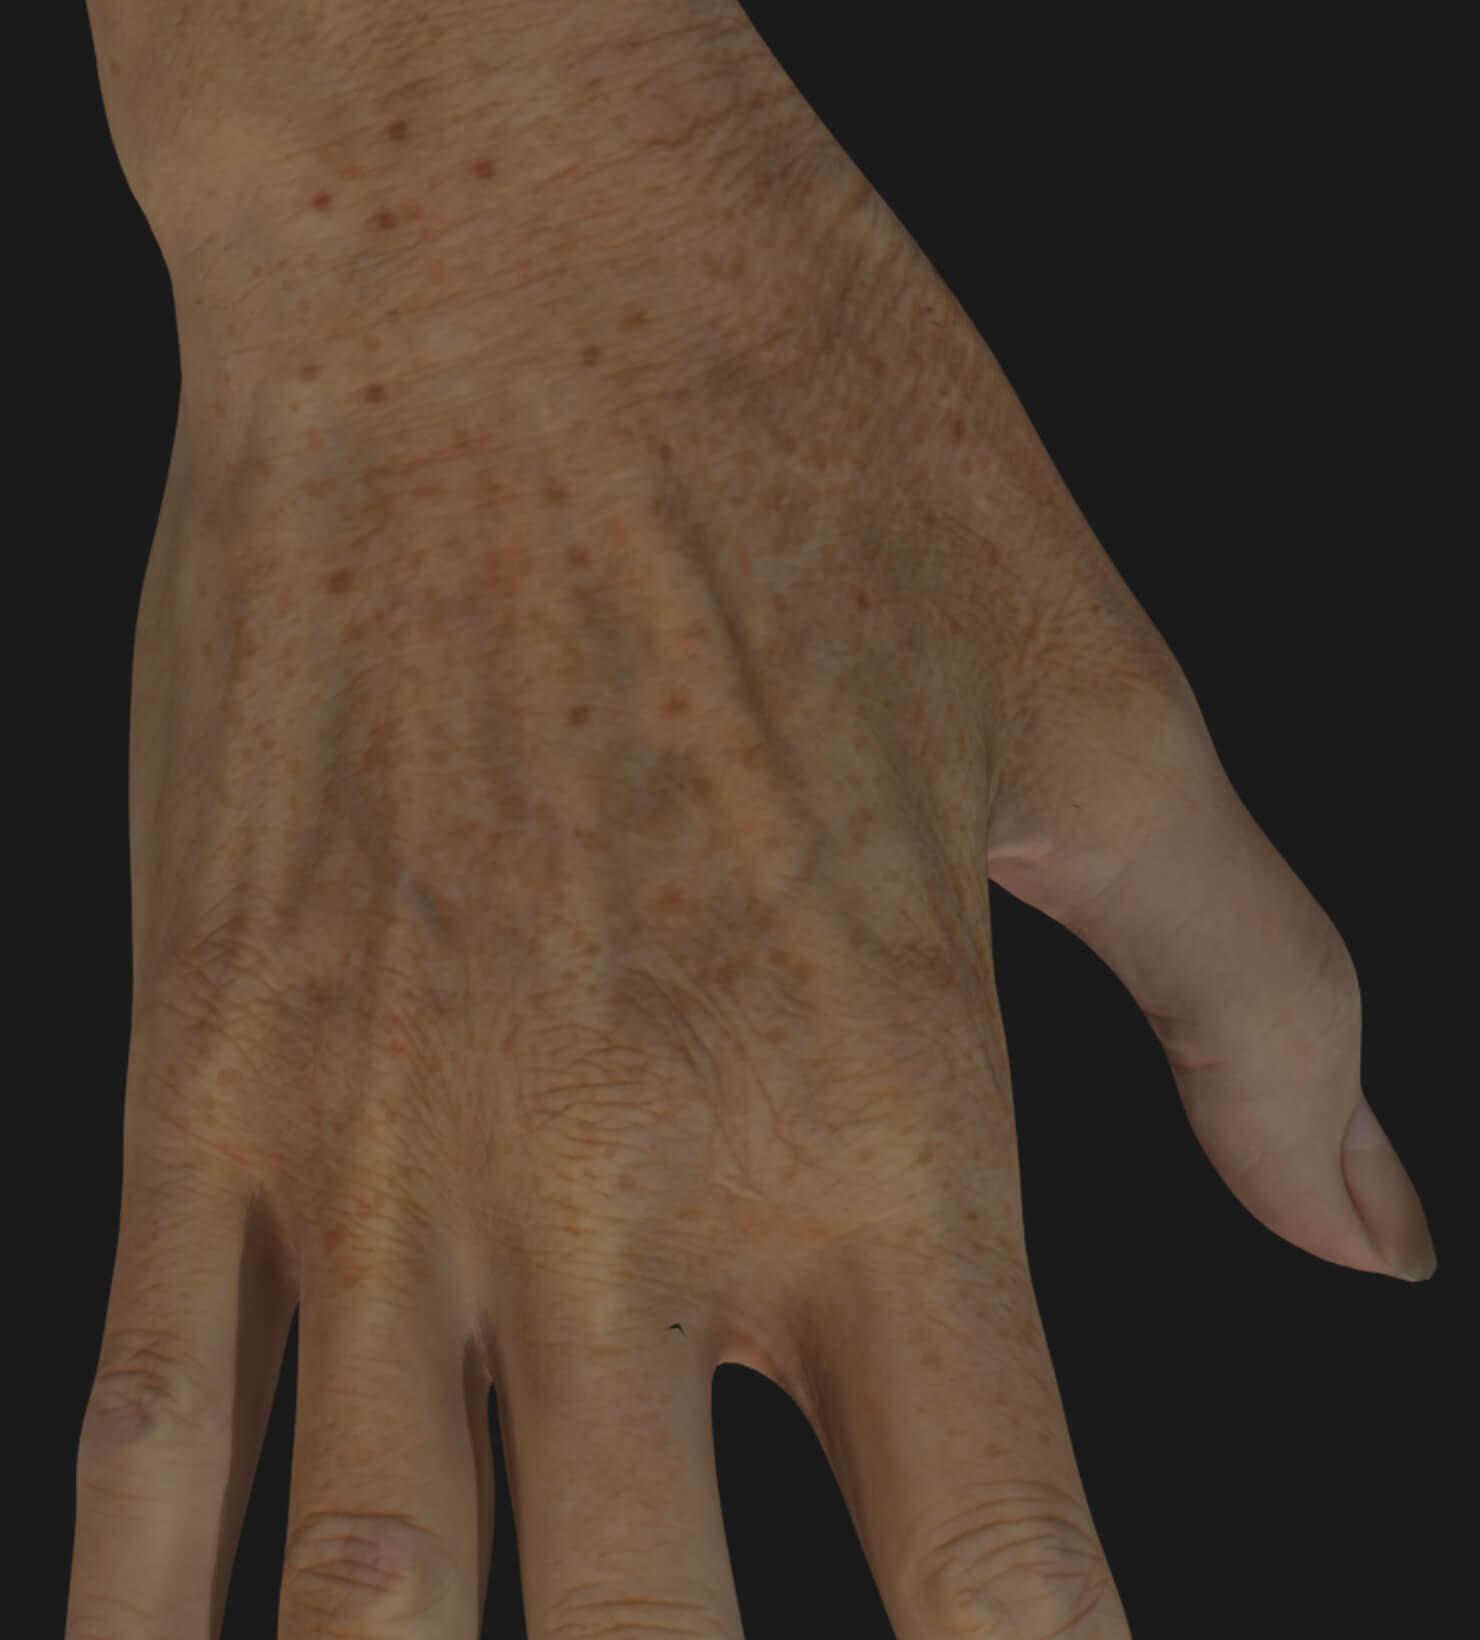 Aging hands of a Clinique Chloé patient to be treated with IPL photorejuvenation